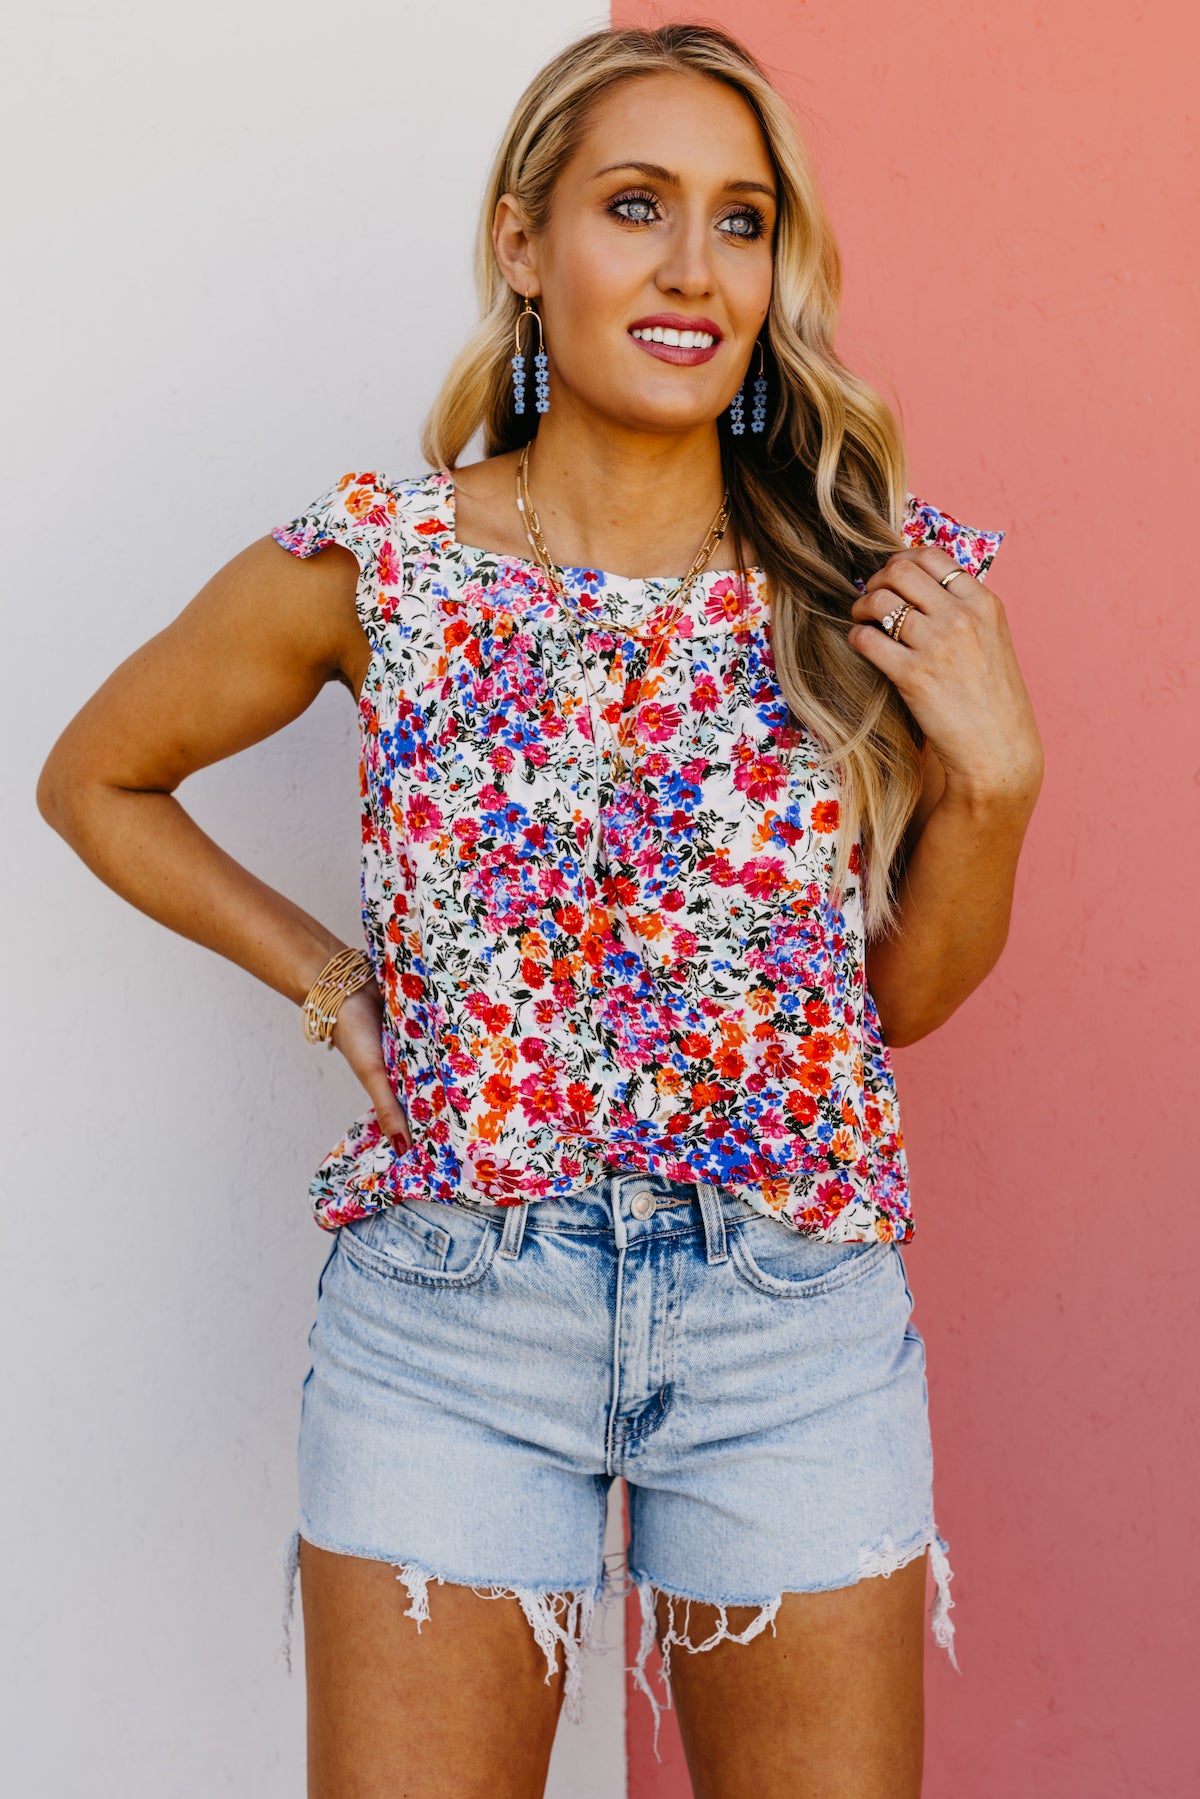 The Melany Floral Square Neck Tank Top